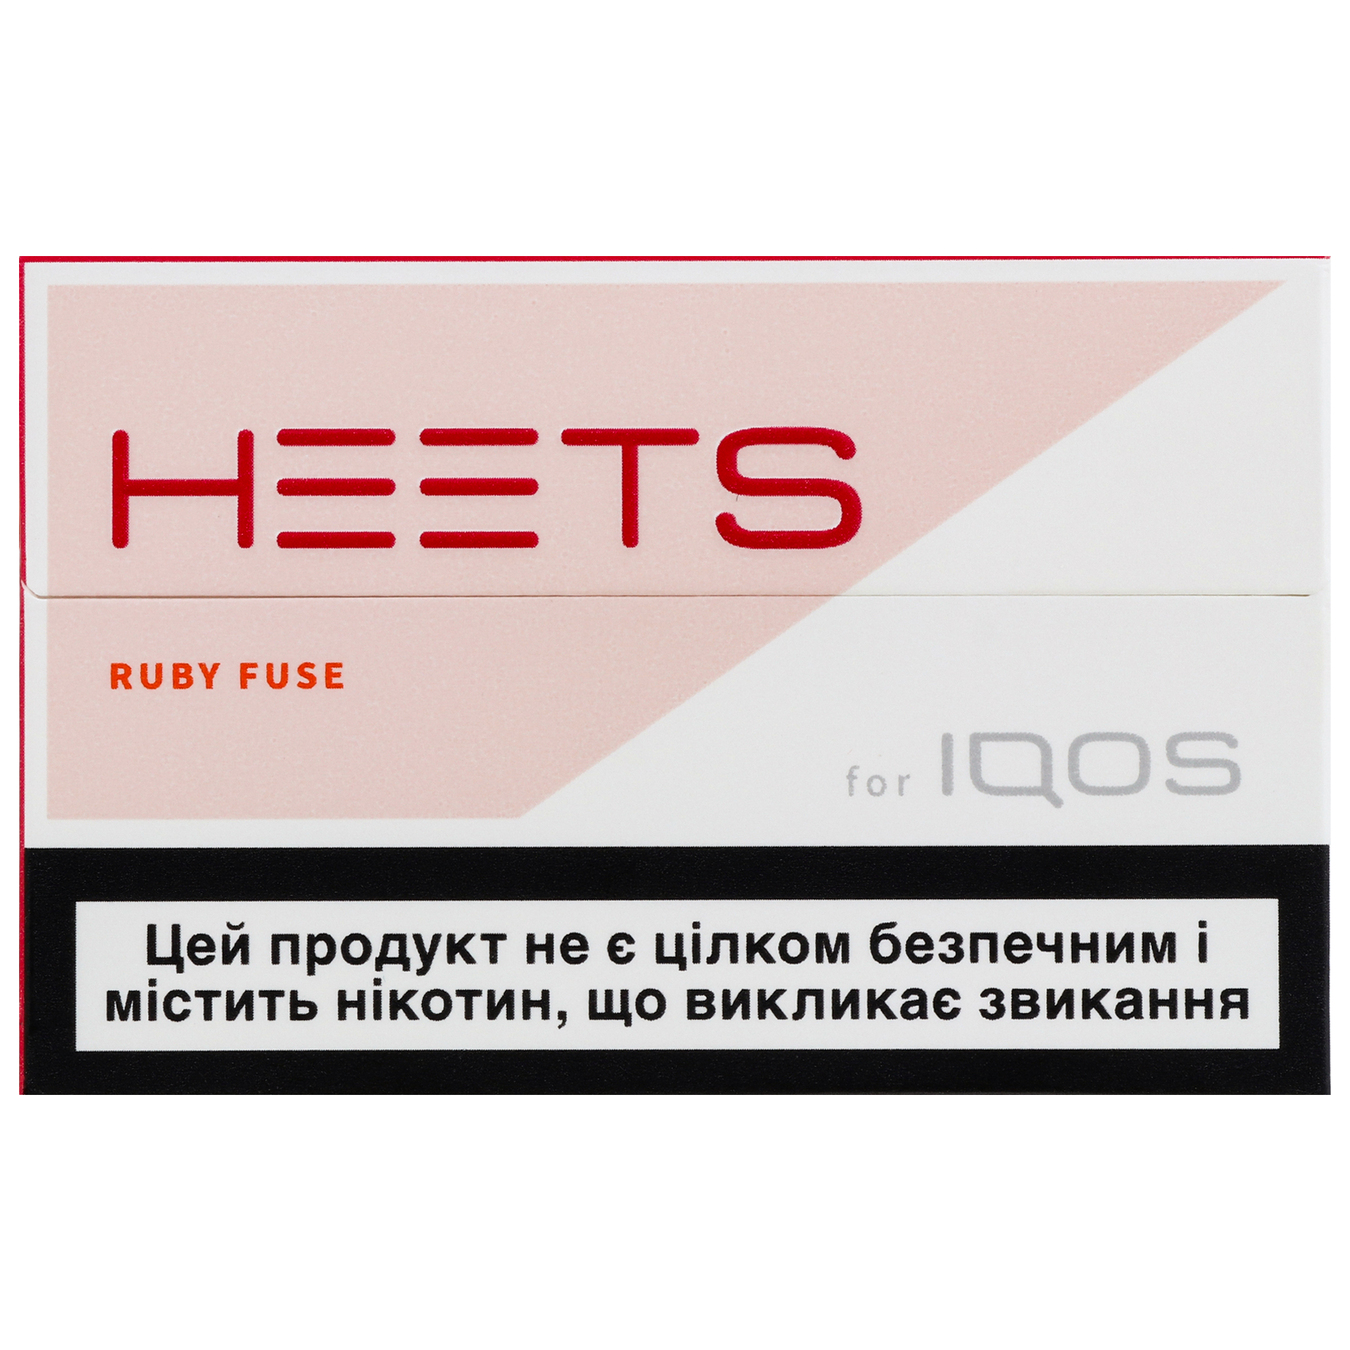 Heets Tobacco product Ruby Fuse for electric heating 20 pcs (the price is indicated without excise tax)